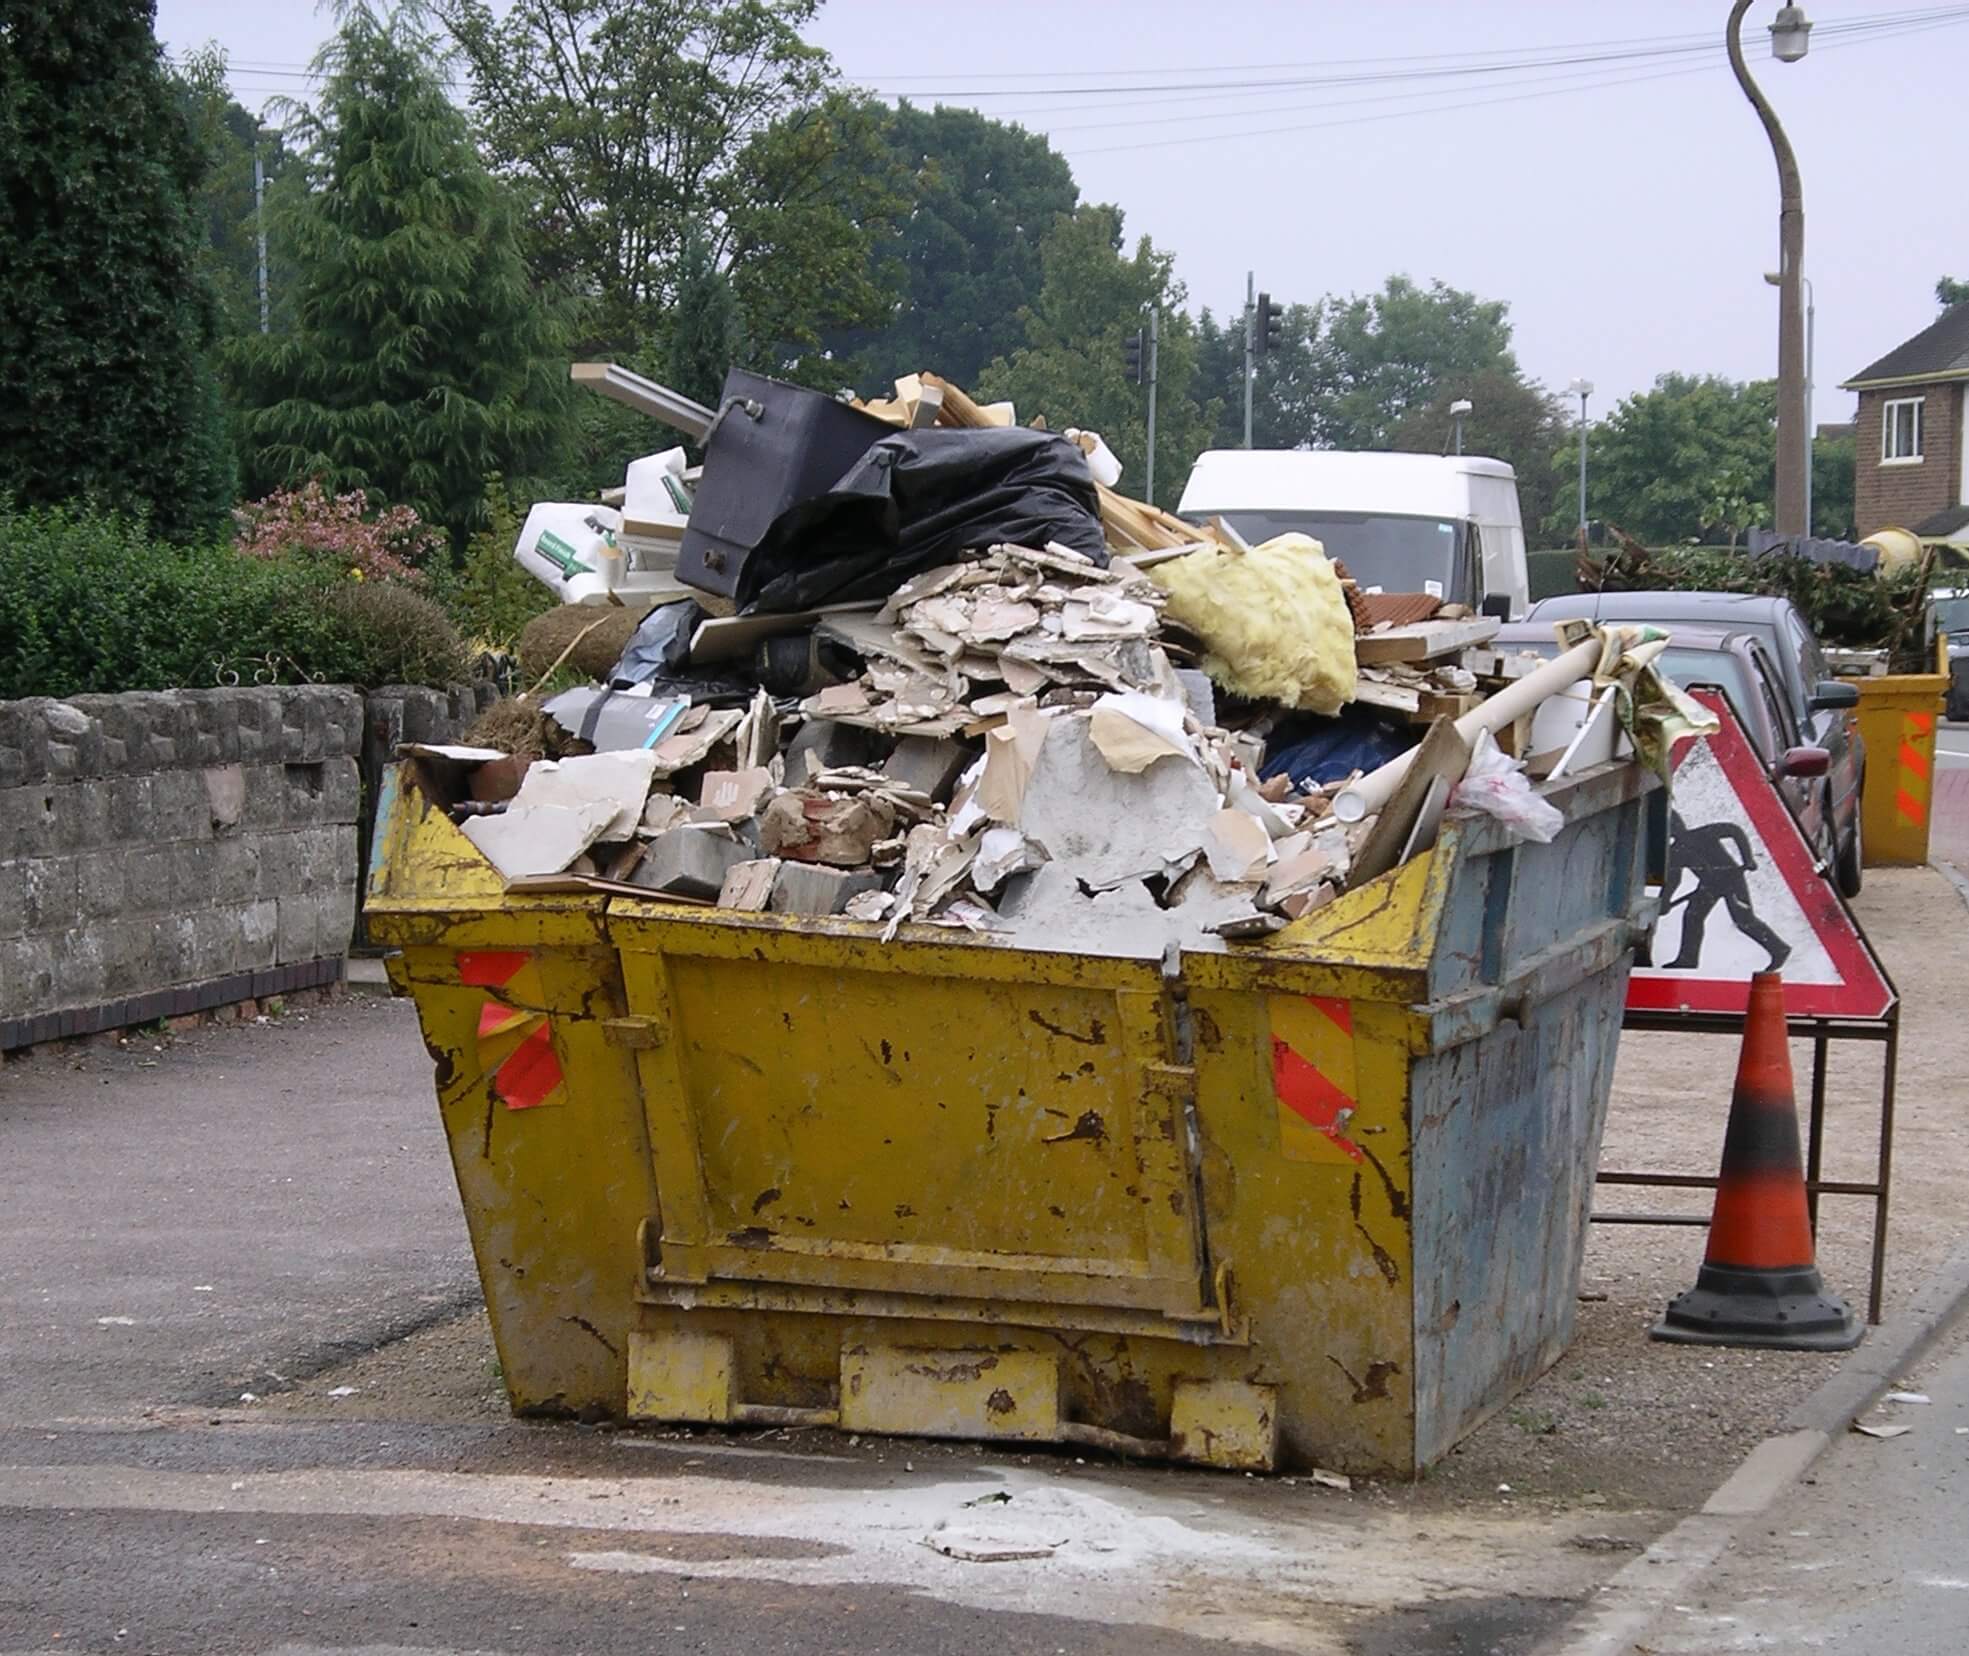 Demolition Removal Dumpster Services-Colorado Dumpster Services of Greeley